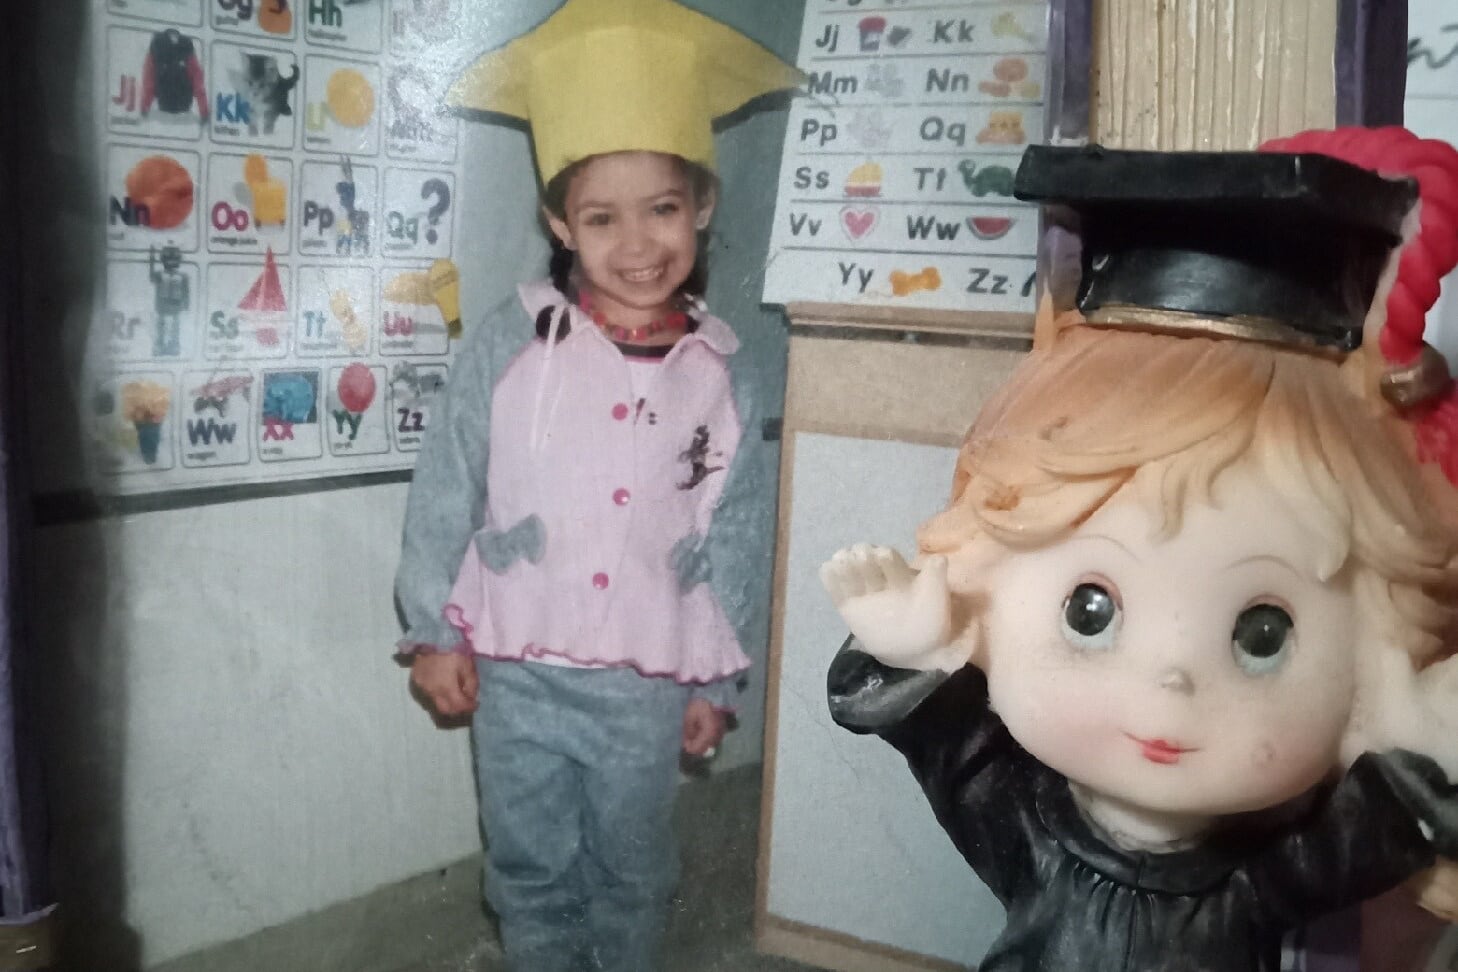 A young girl poses with a yellow graduation cap.